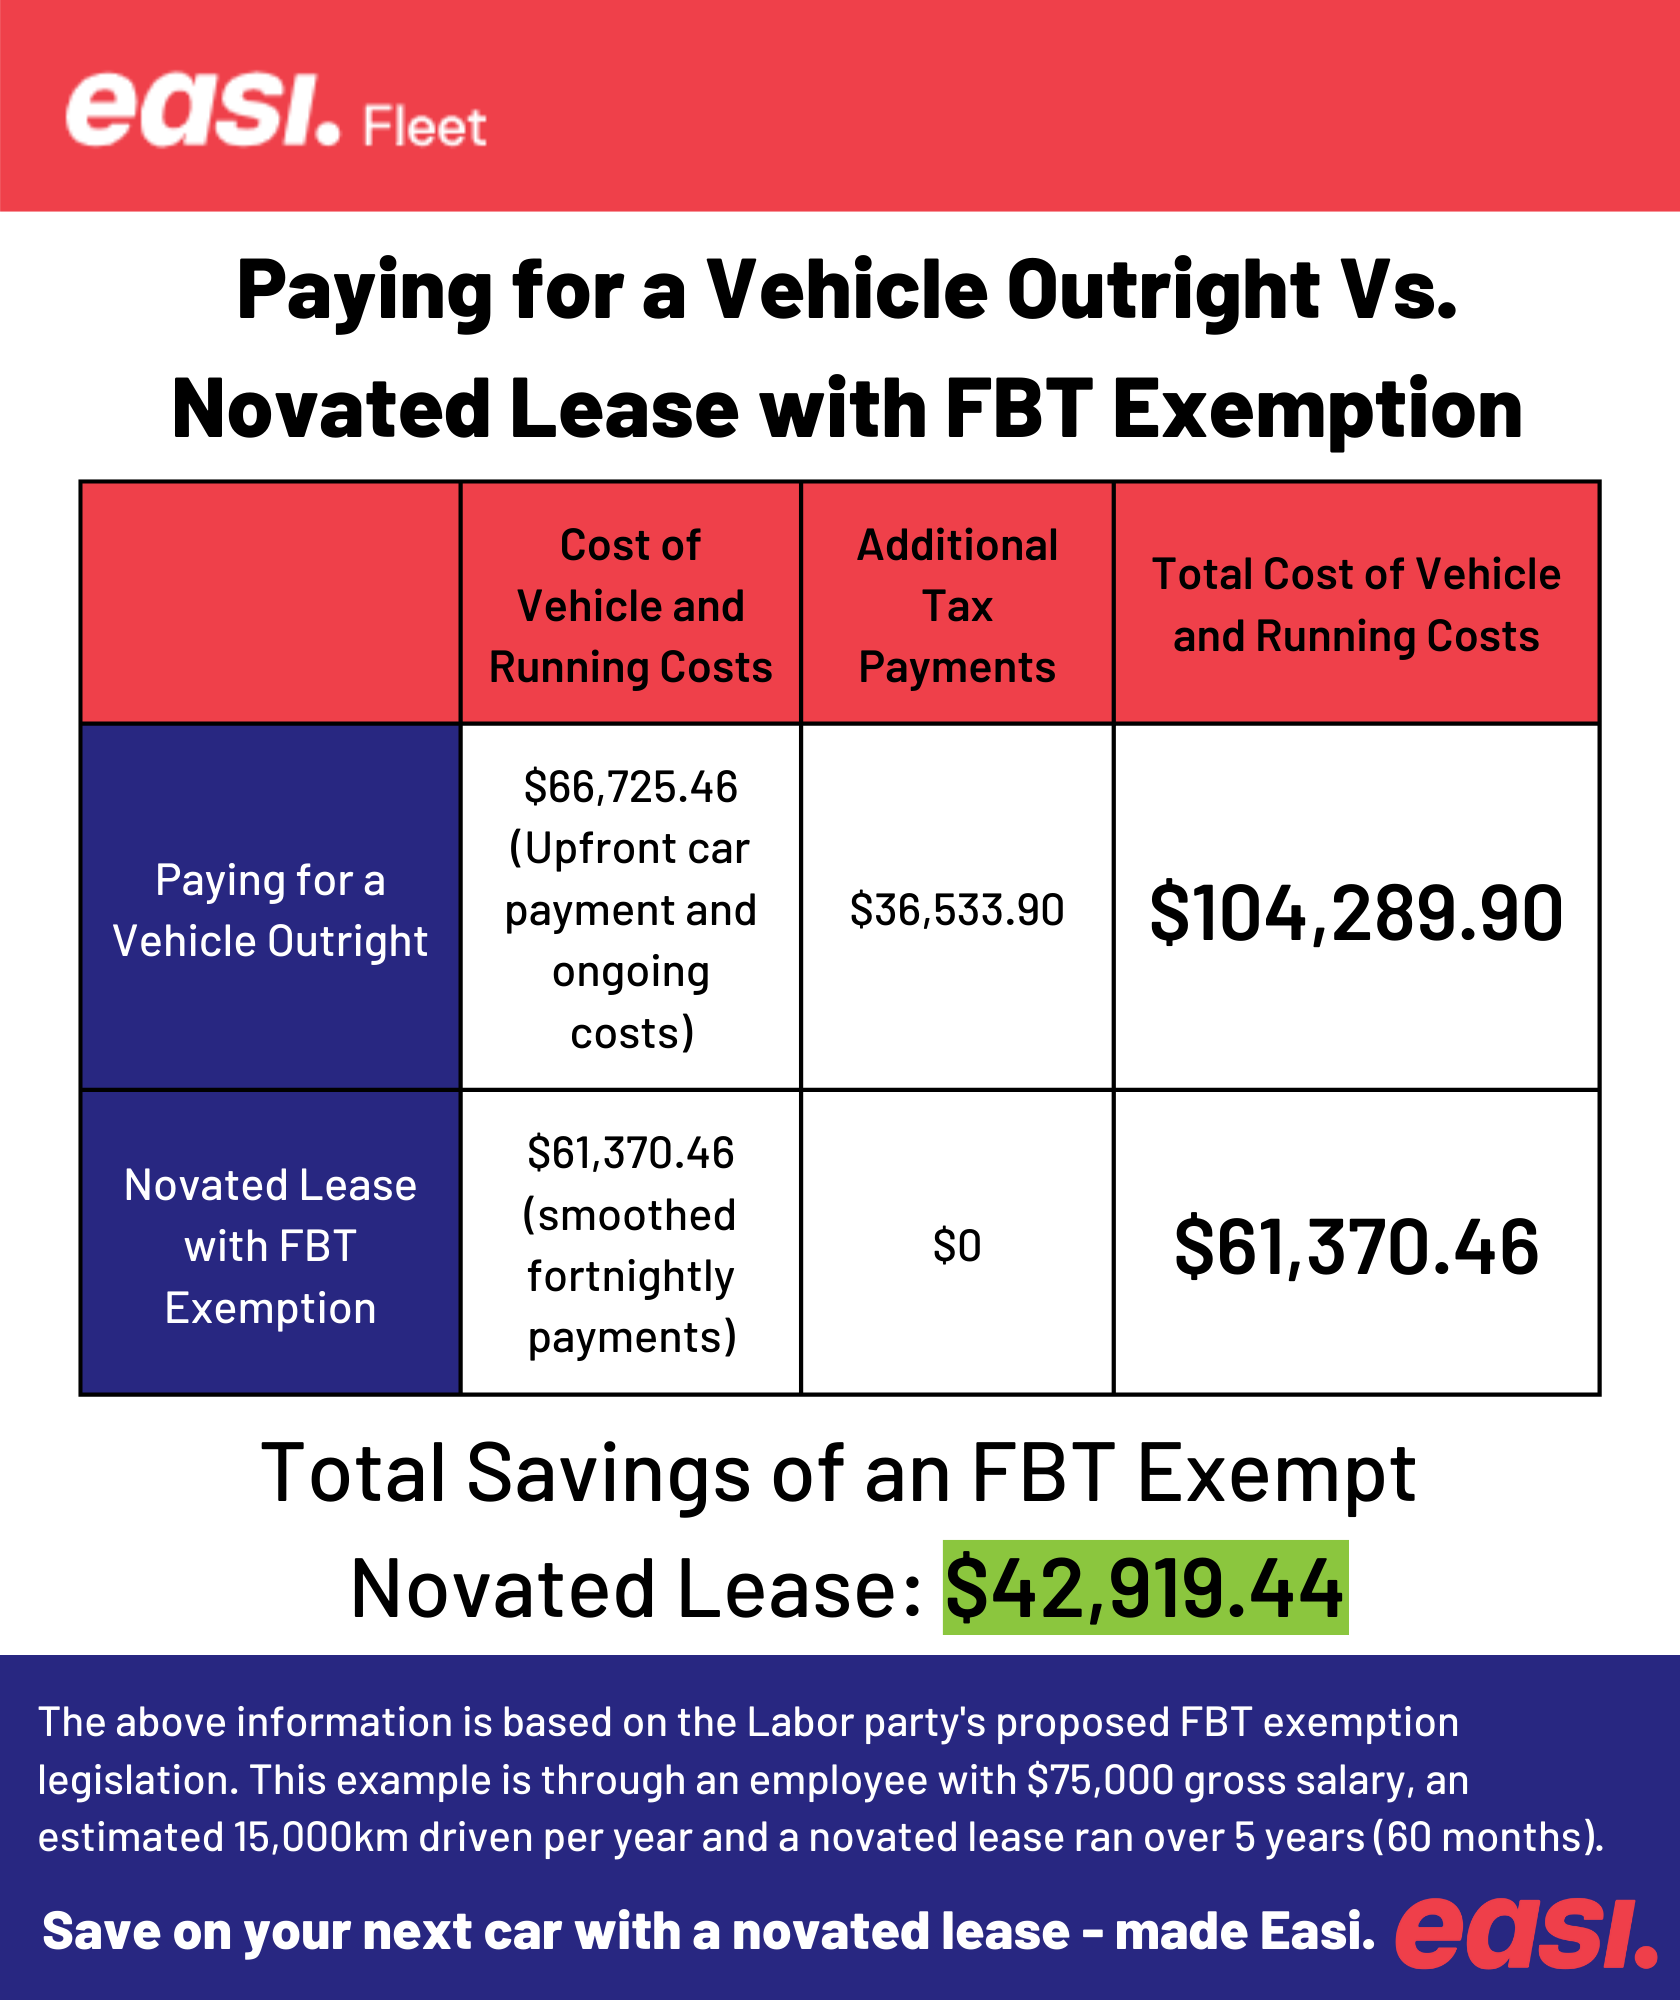 An UPDATED graphic showing the new FBT exempt novated lease compared to buying a vehicle outright